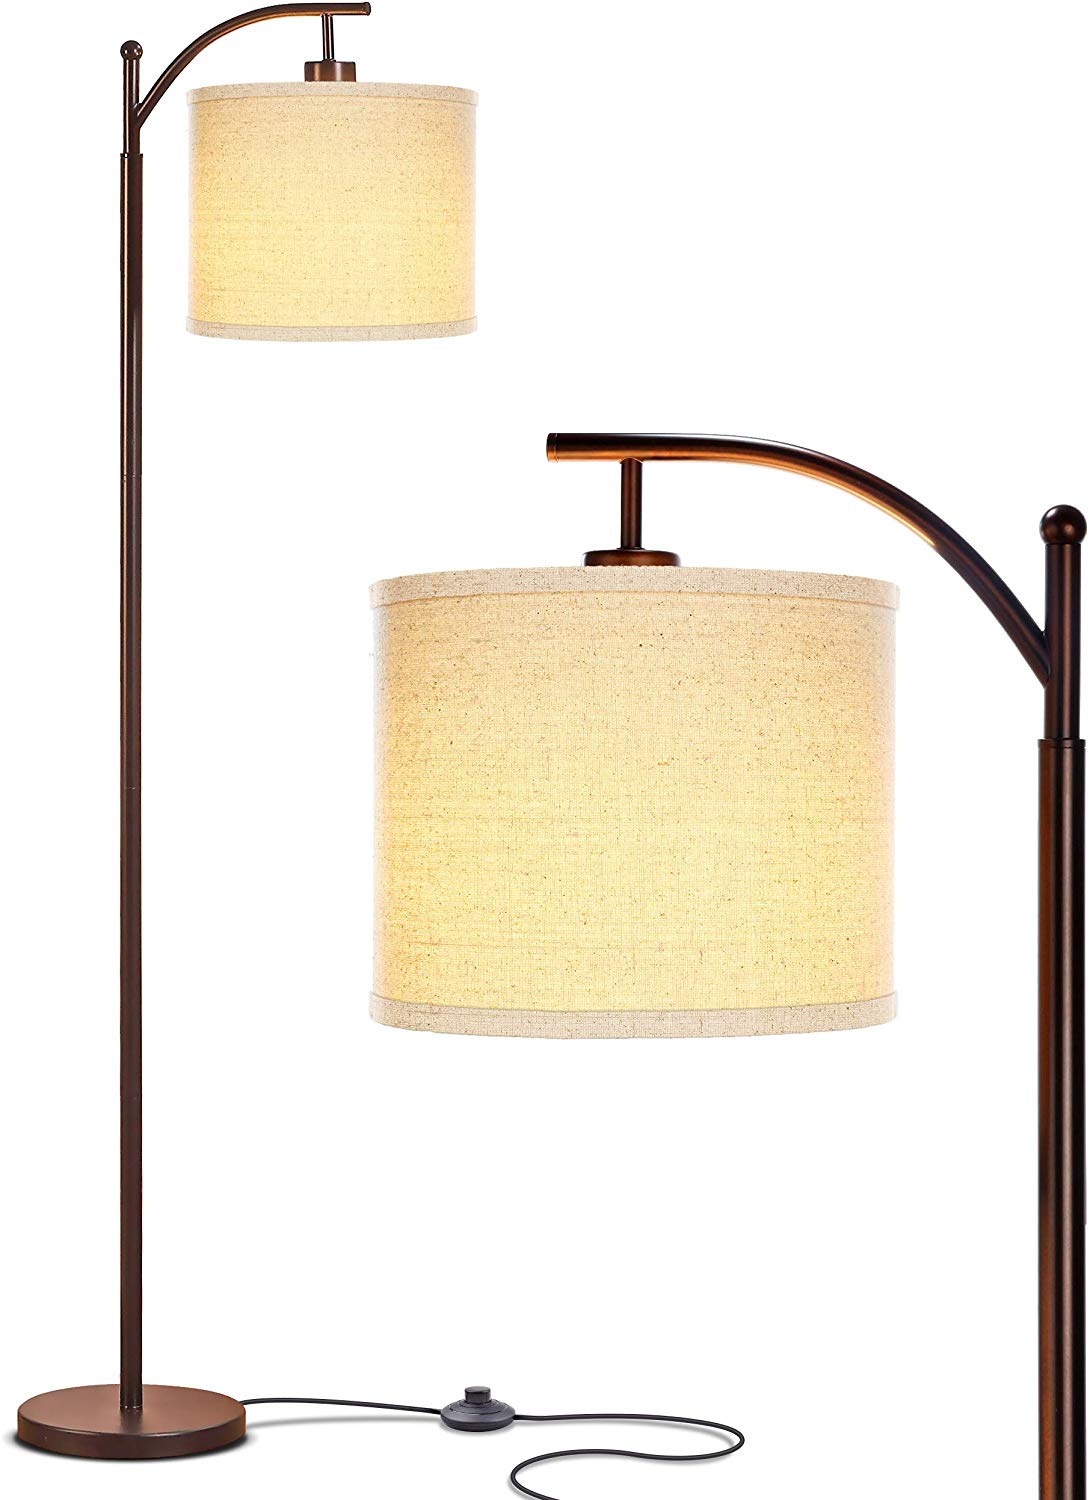 Brightech Dimmable Shaded LED Floor Lamp